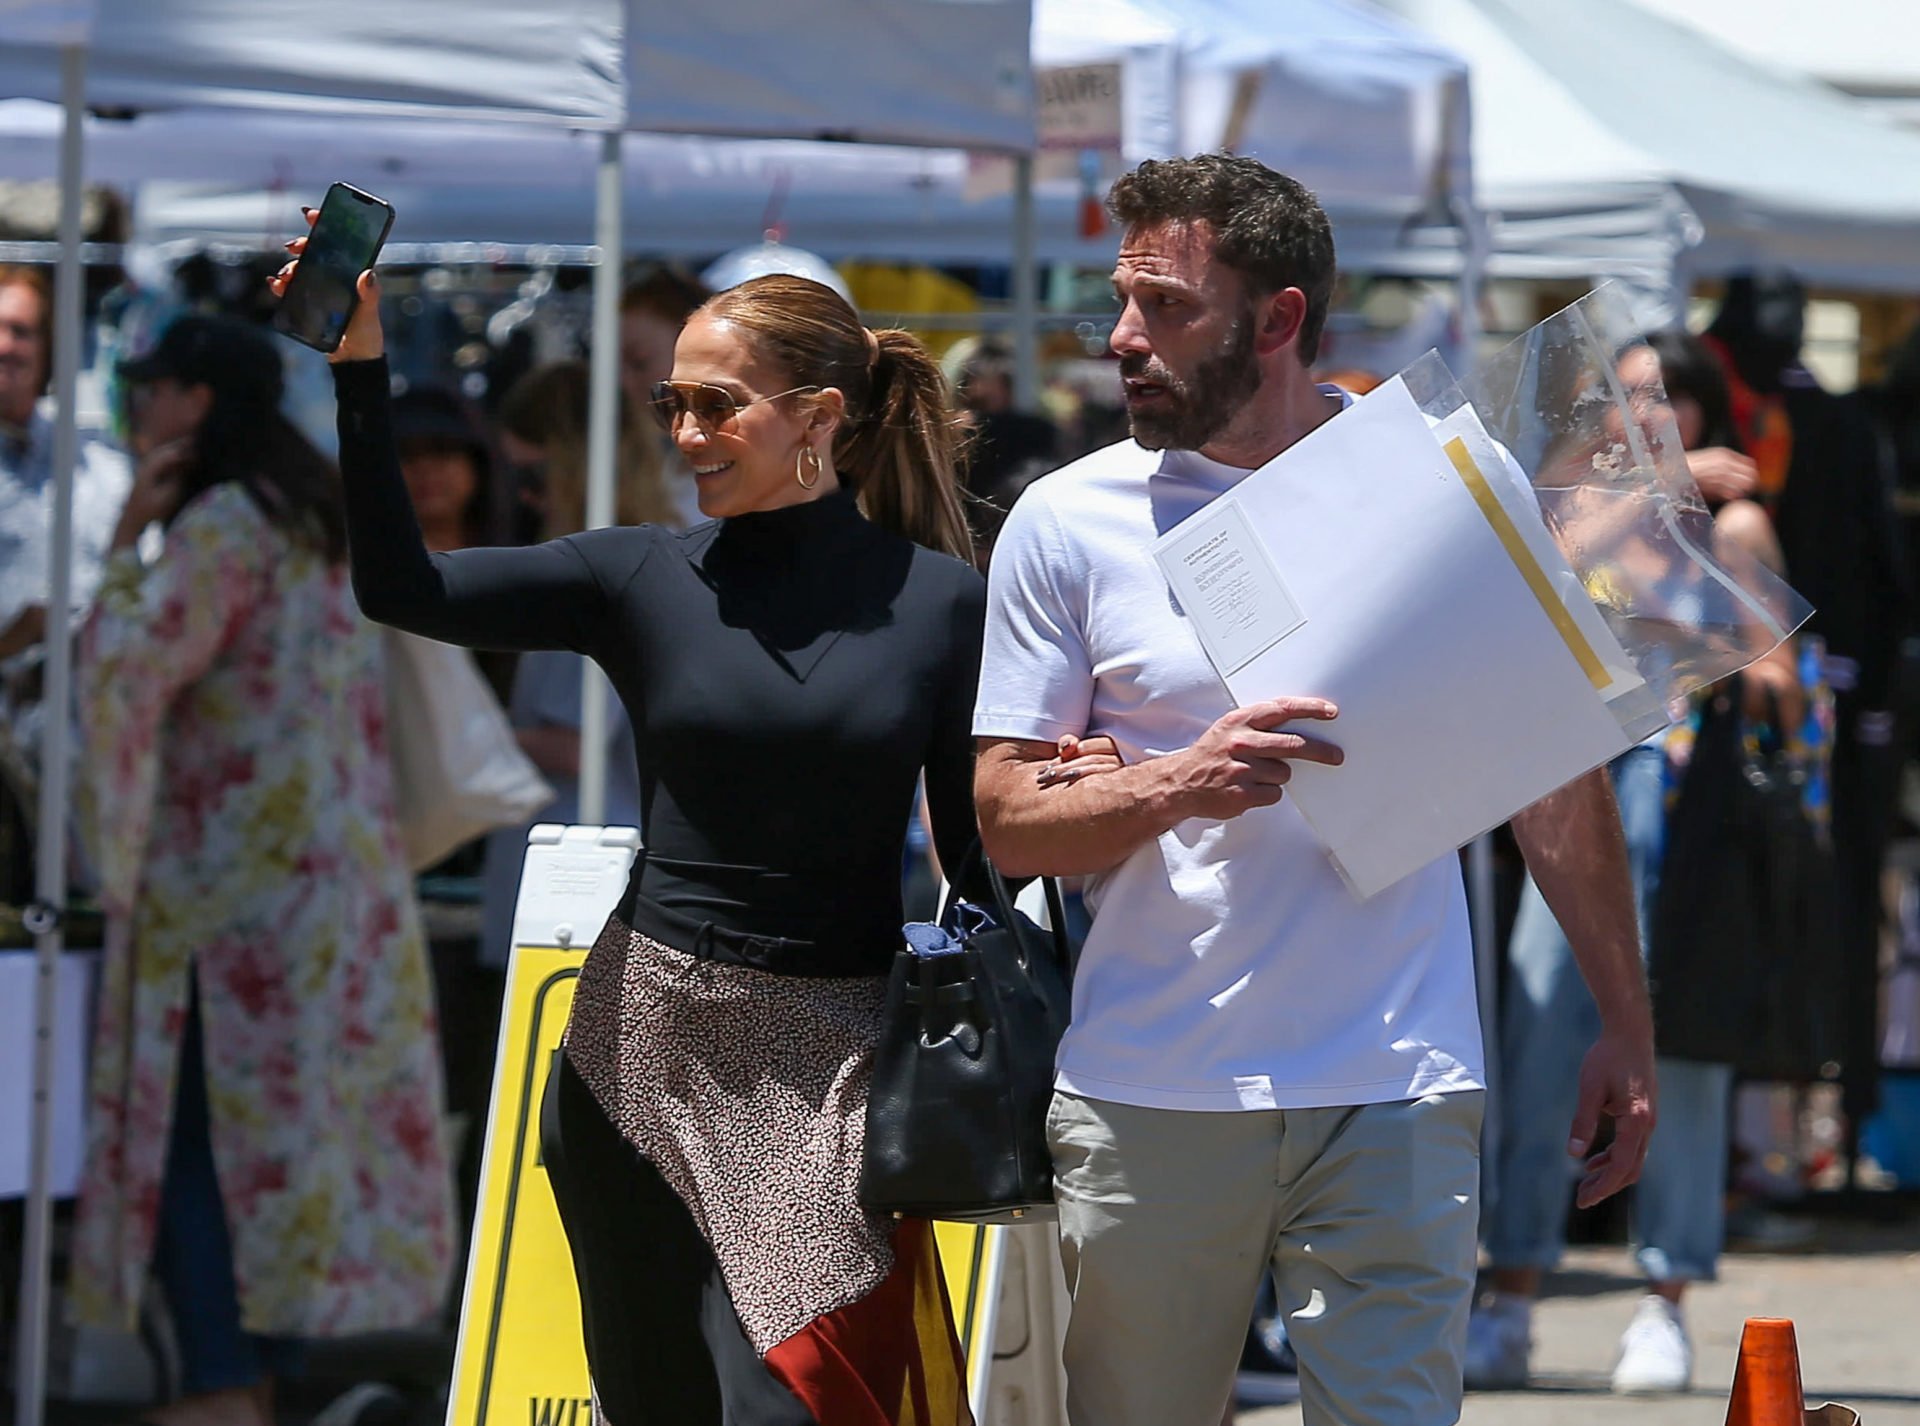 J Lo and Ben Affleck wedding pics show love is patient – and well worth the wait